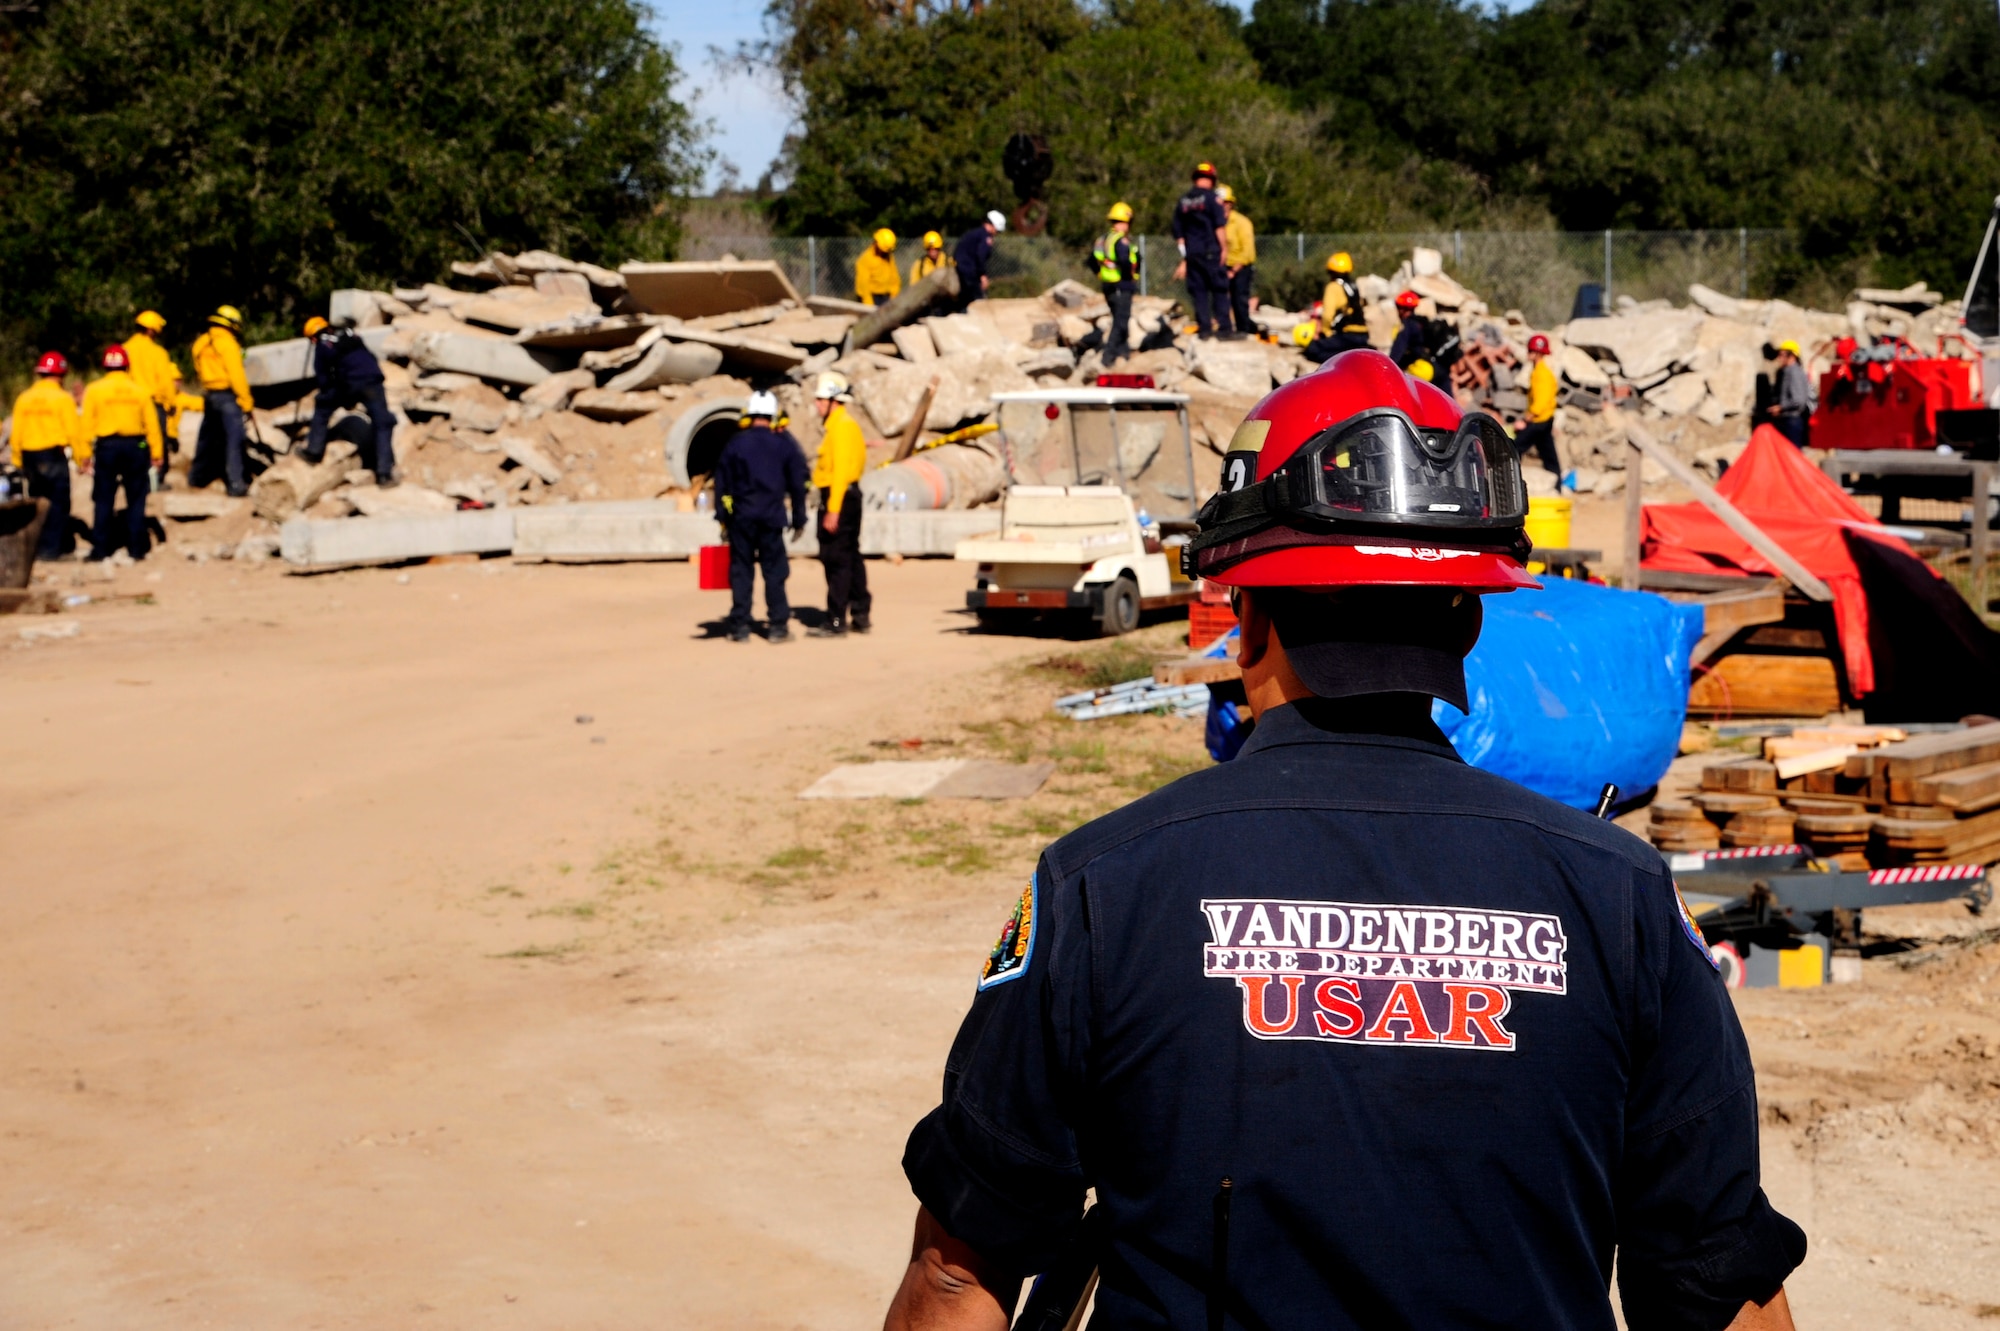 Essex Martinez observes Urban Search and Rescue (US&R) Task Force members during an exercise Feb. 2, 2015, at Lompoc, Calif. As part of a regional US&R team, Vandenberg firefighters trained alongside counterparts from local departments -- focusing on locating, extracting and stabilizing victims trapped in confined spaces. Martinez is the 30th Civil Engineer Squadron Urban Search and Rescue fire captain. (U.S. Air Force photo/Staff Sgt. Jim Araos)